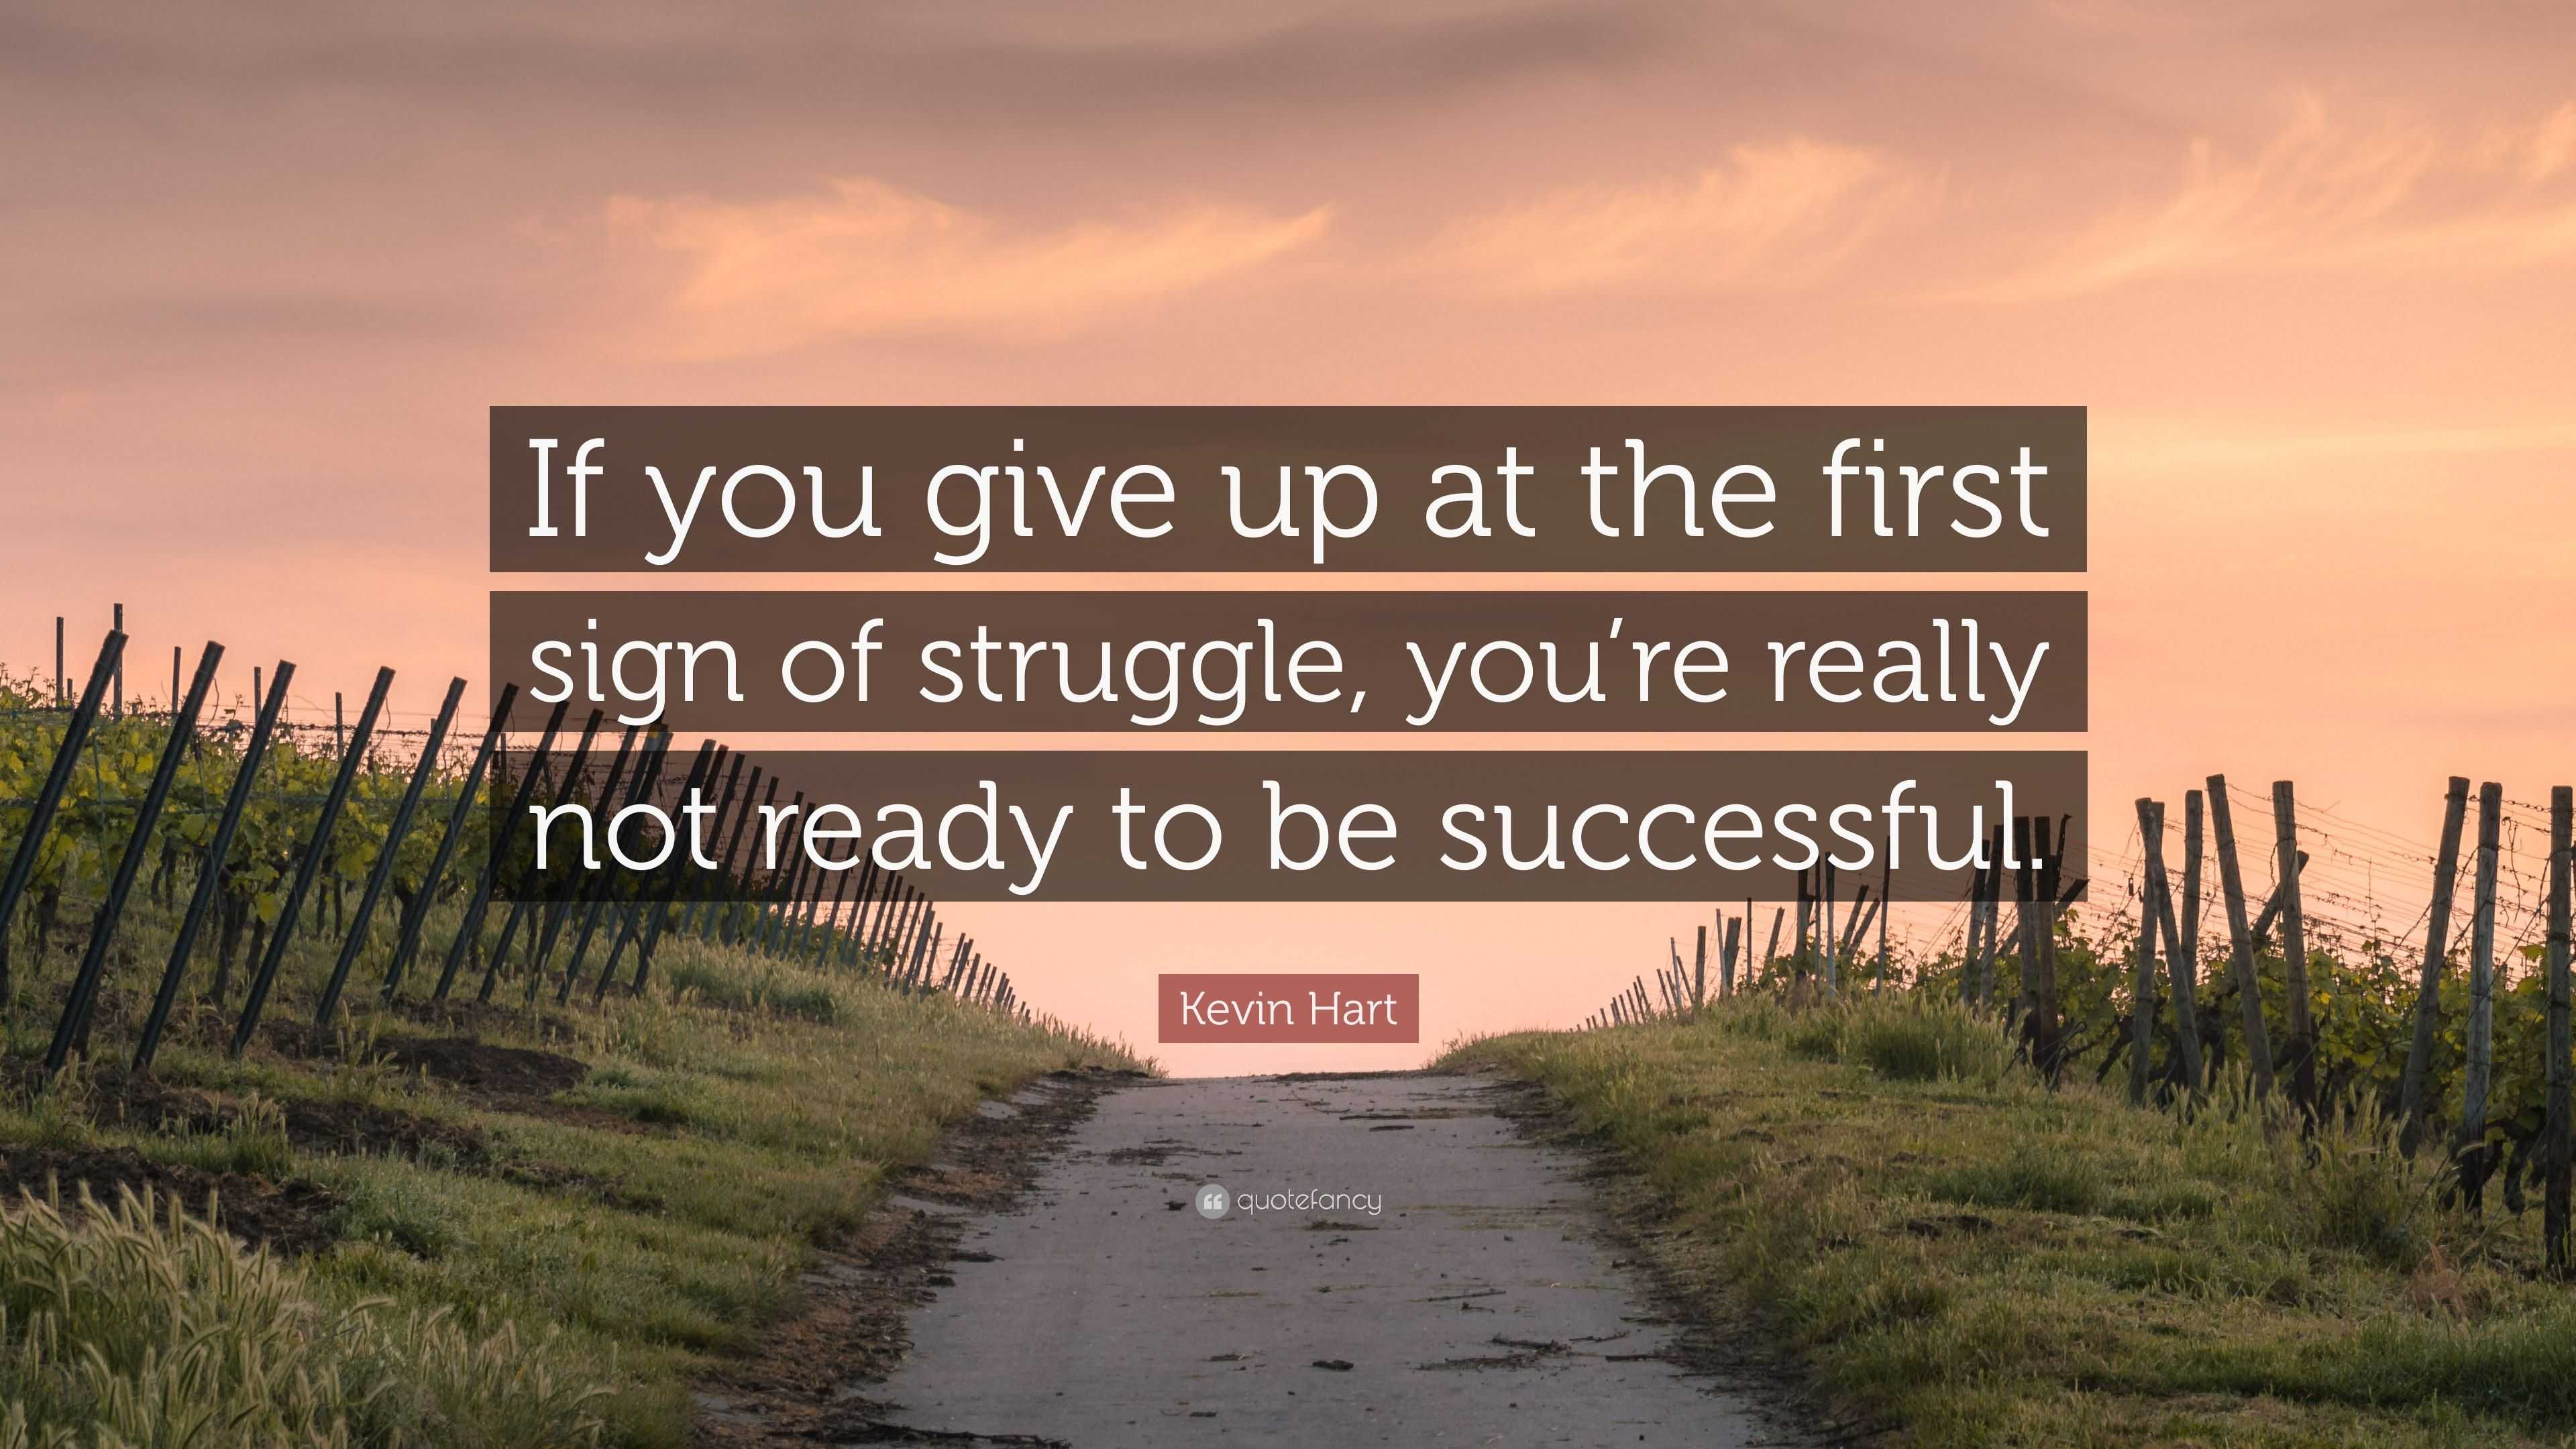 Kevin Hart Quote: “If you give up at the first sign of struggle, you’re ...